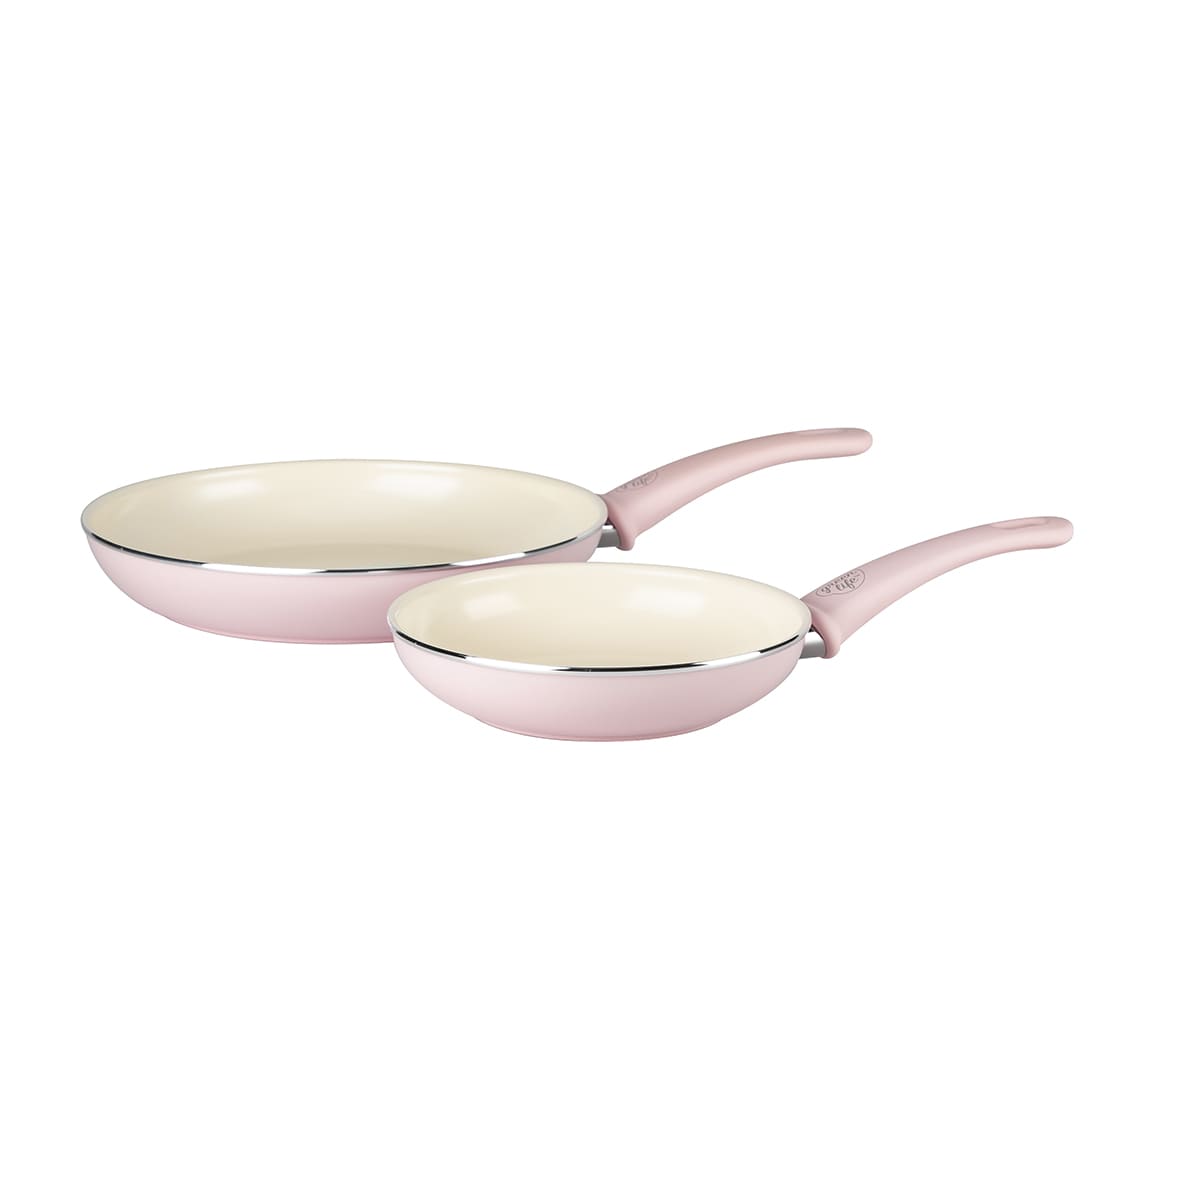 GREENLIFE SOFT GRIP <br> 2PC COOKWARE SETS, PINK - 18 & 26CM